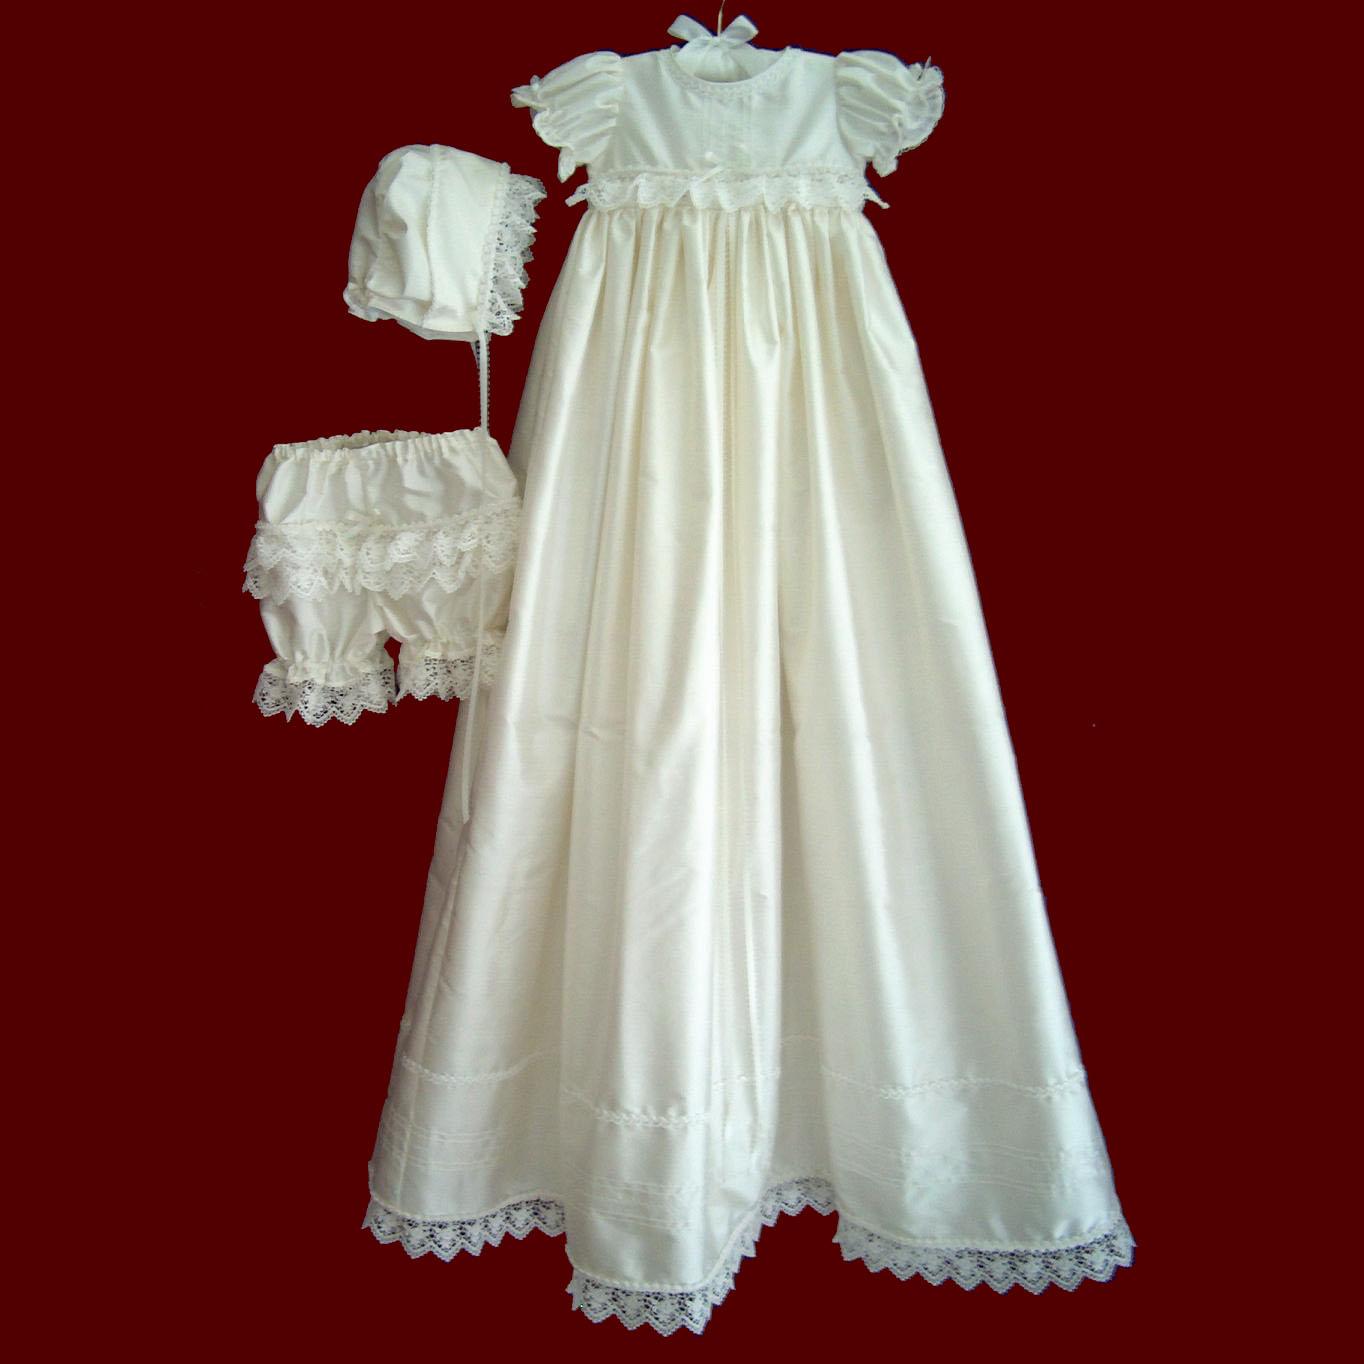 Cherish The Moment Girls Infant Christening White Gown with Pink Sash & Bonnet 